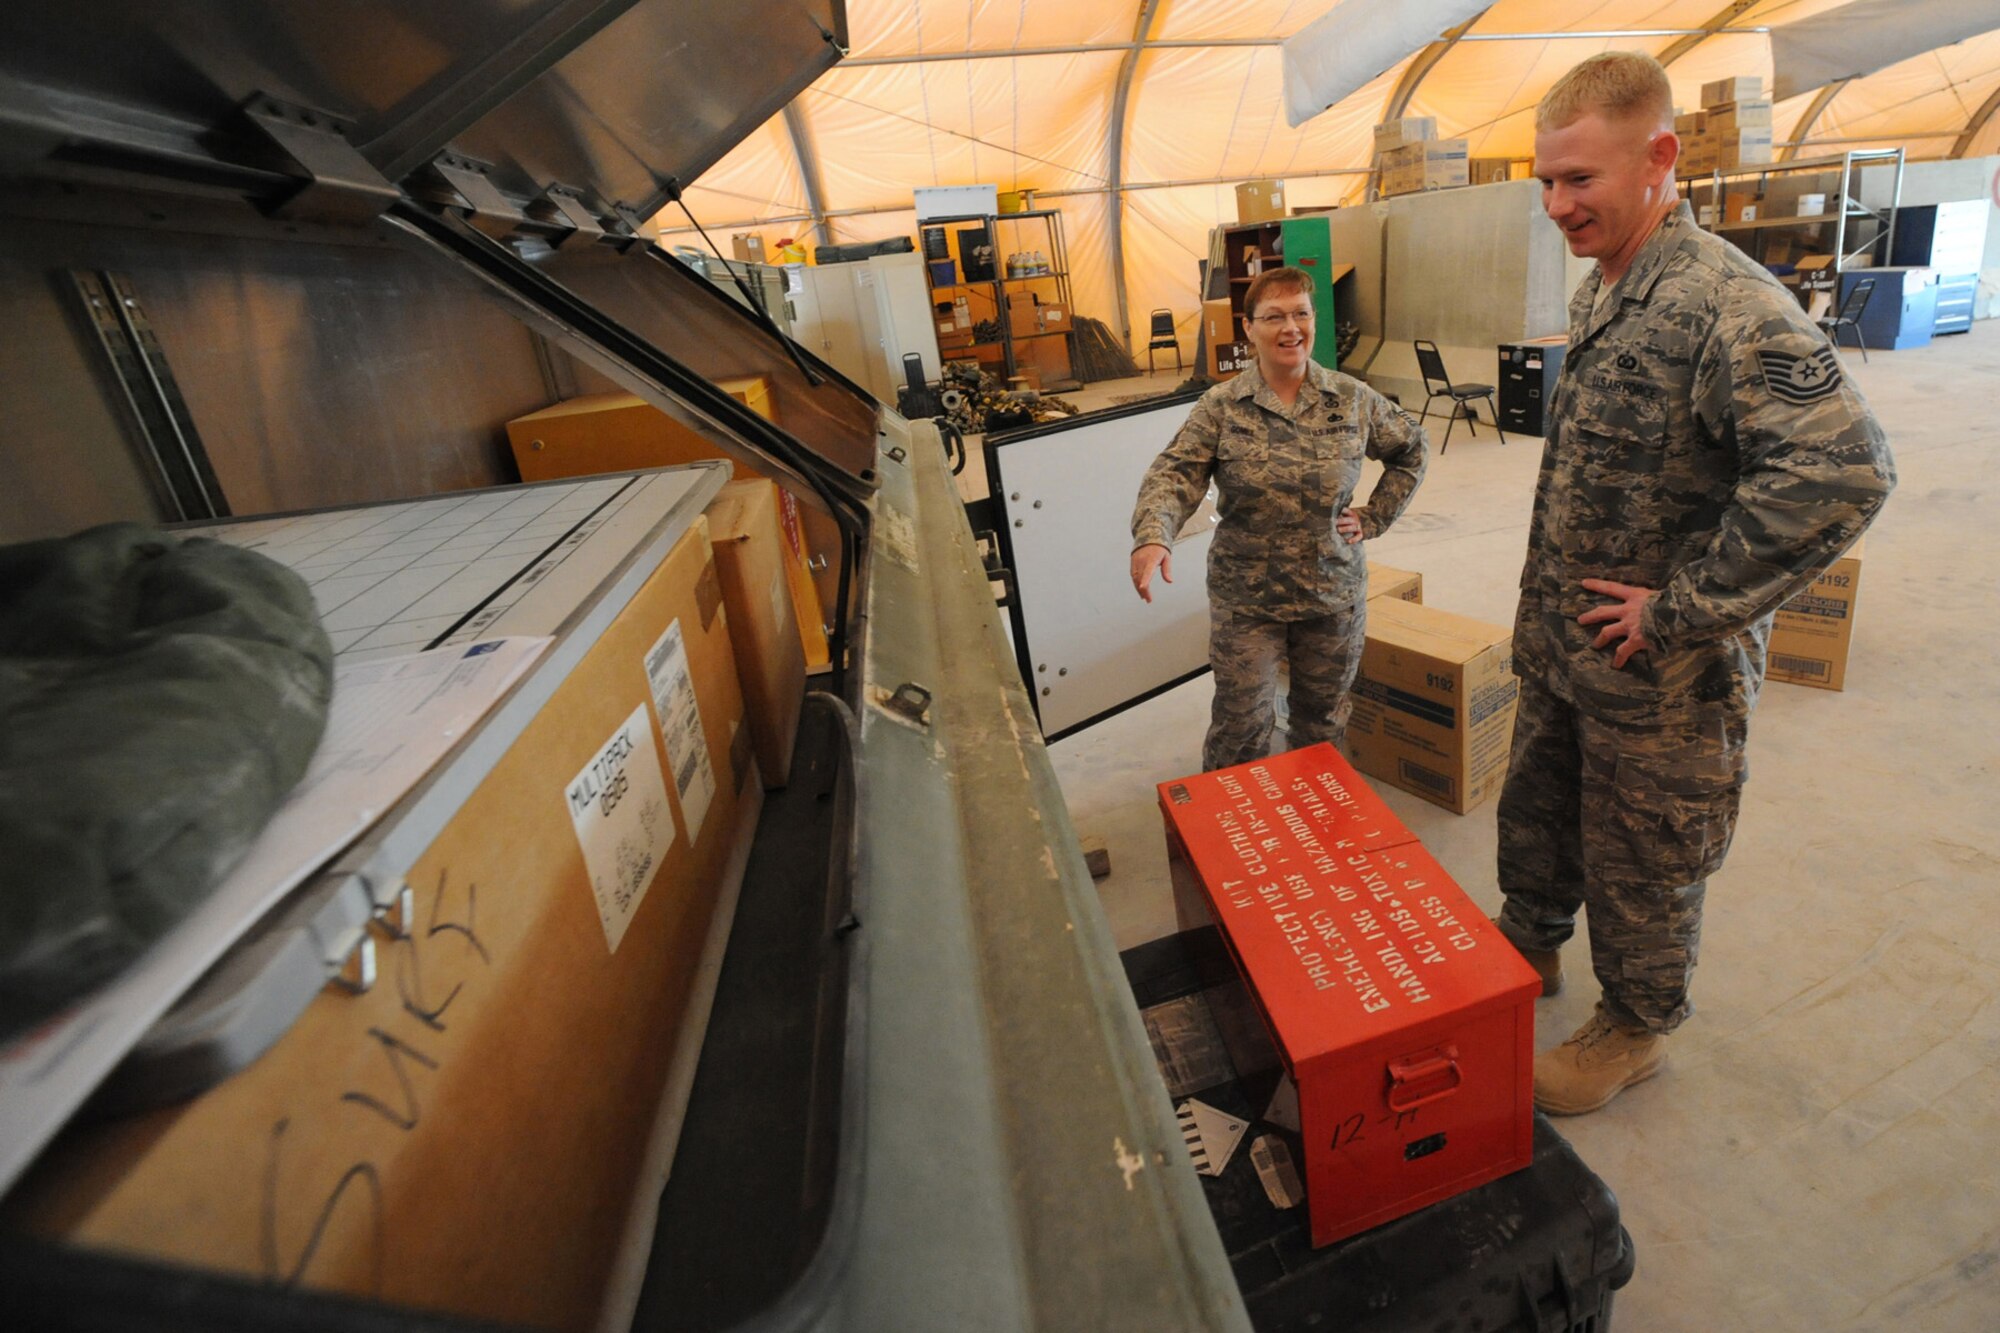 Master Sgt. Lorna Gomez and Tech. Sgt. Danny Smith, 379th Expeditionary Operations Support Squadron aircrew flight equipment, discuss which training items to pack on a pallet at a non-disclosed Southwest Asia location, Jan. 25, 2010. The equipment will be sent to Afghanistan for International Security Assistance Force Aircrew Flight Equipment trainers to teach Afghani instuctors to train their airmen.  (U.S. Air Force photo byTech. Sgt. Michelle Larche)[RELEASE]